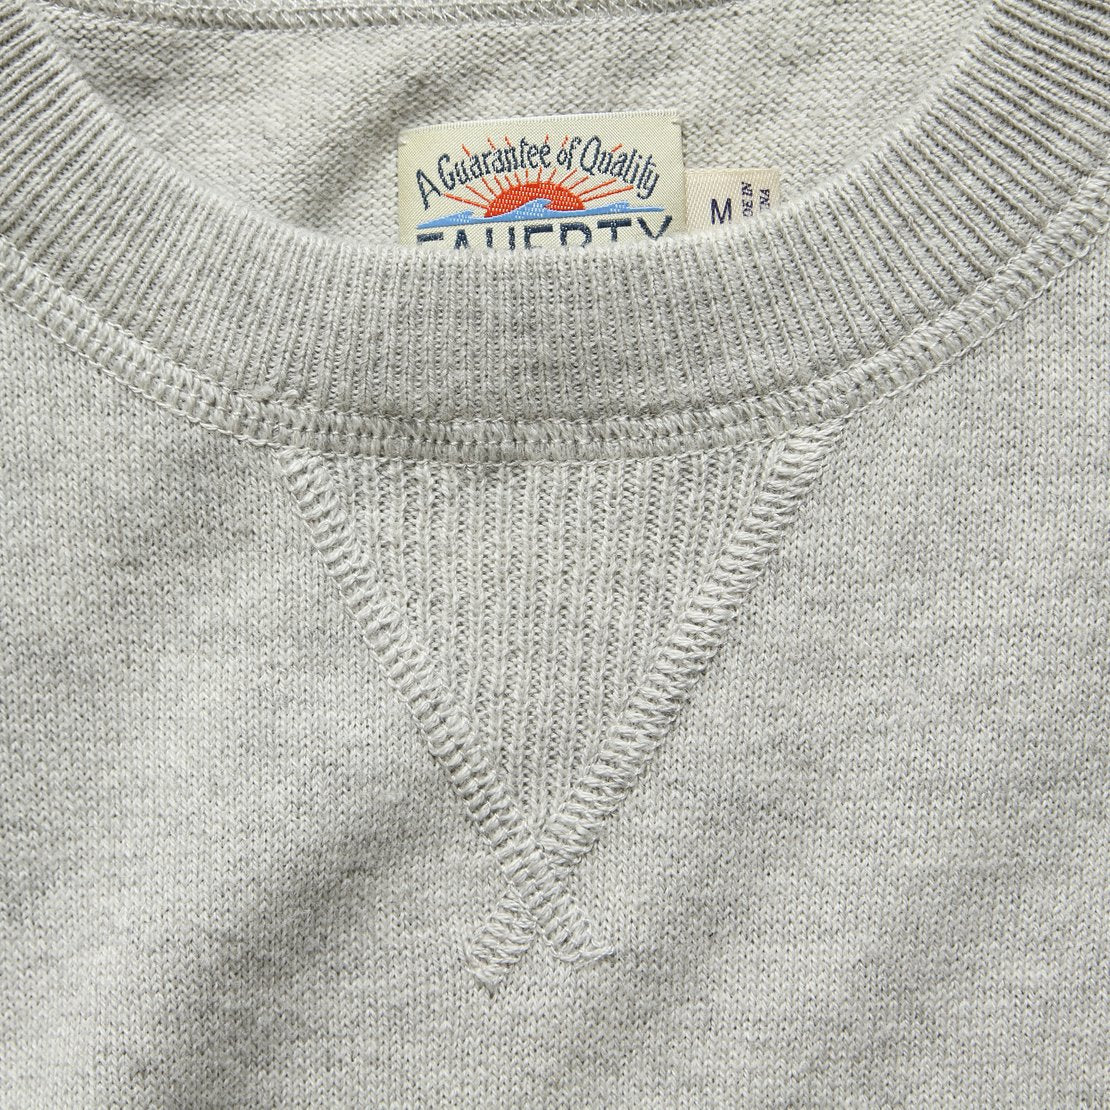 Sconset Crew Sweater - Light Grey Heather - Faherty - STAG Provisions - Tops - Sweater